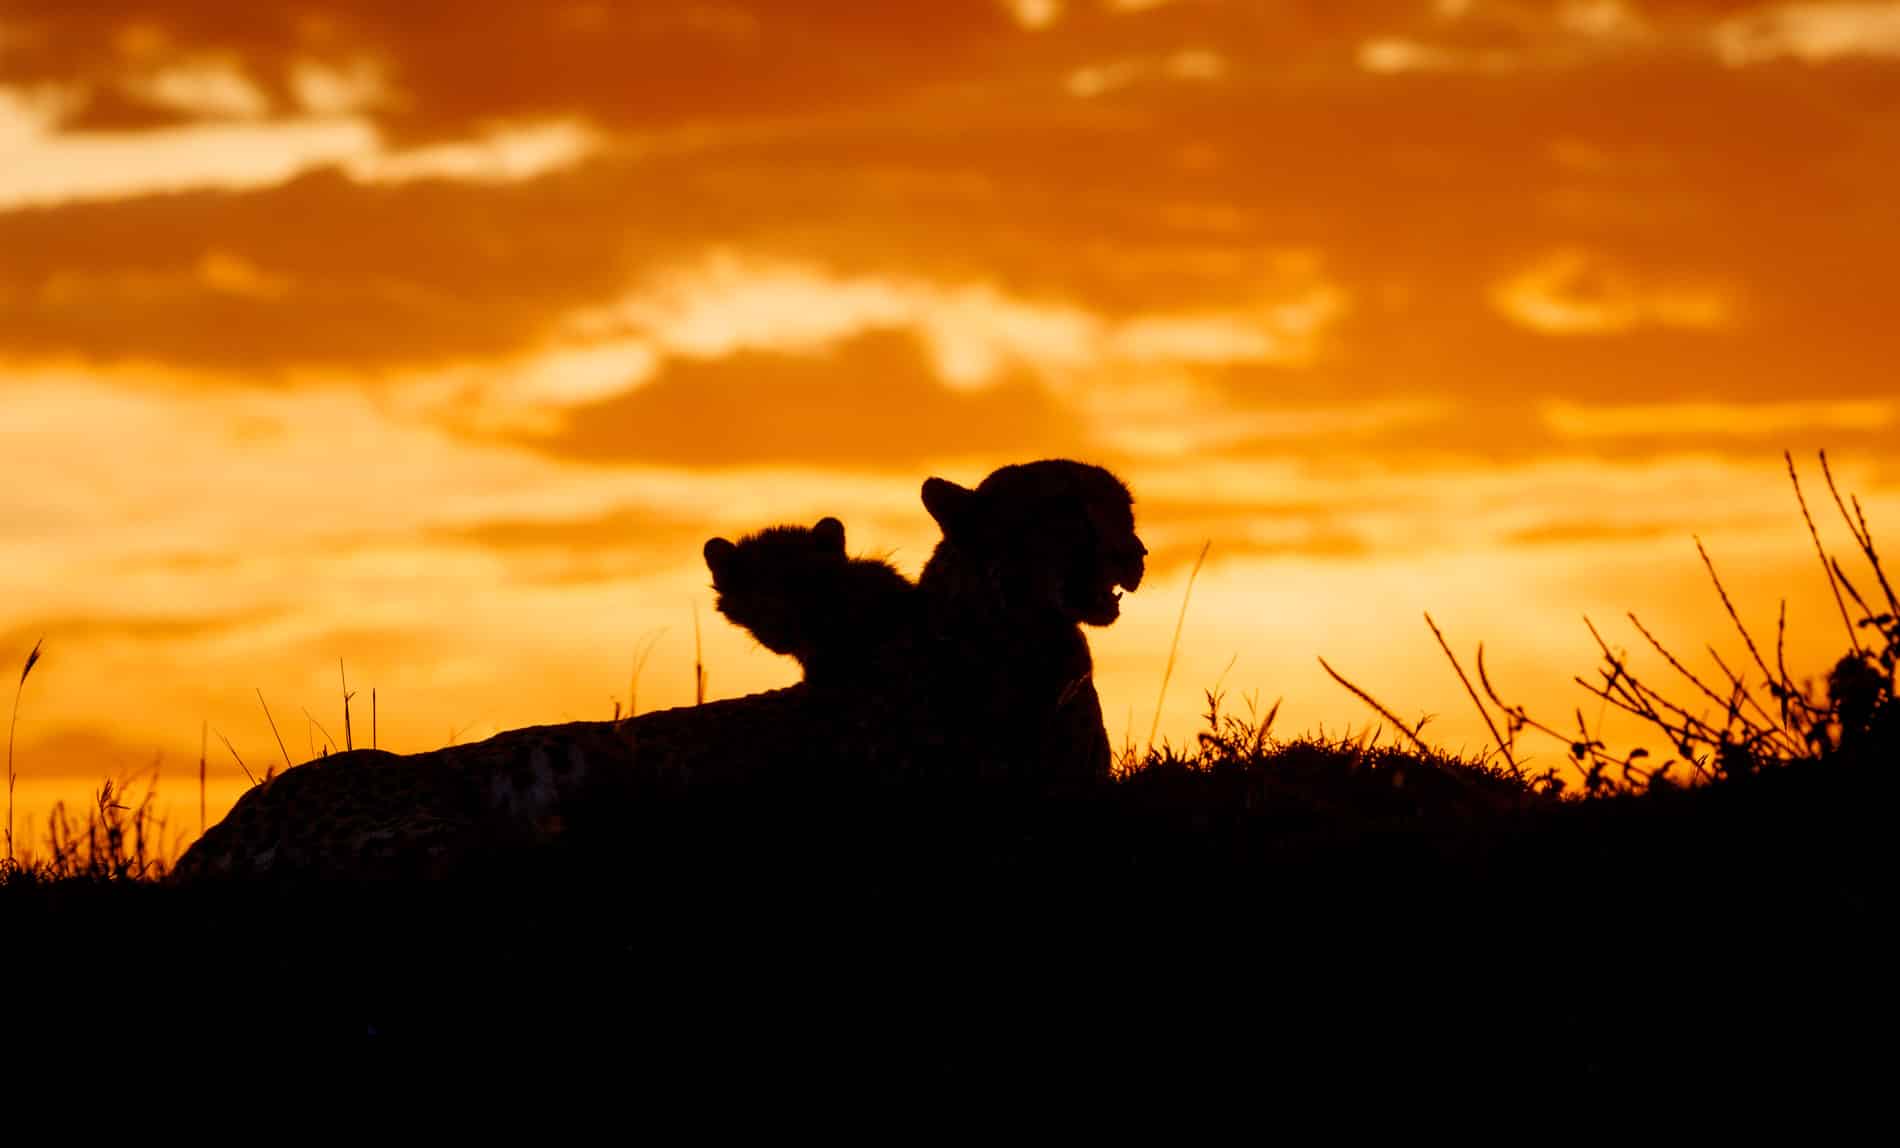 Safari silhouette of a cheetah and cub at sunset by njwight.